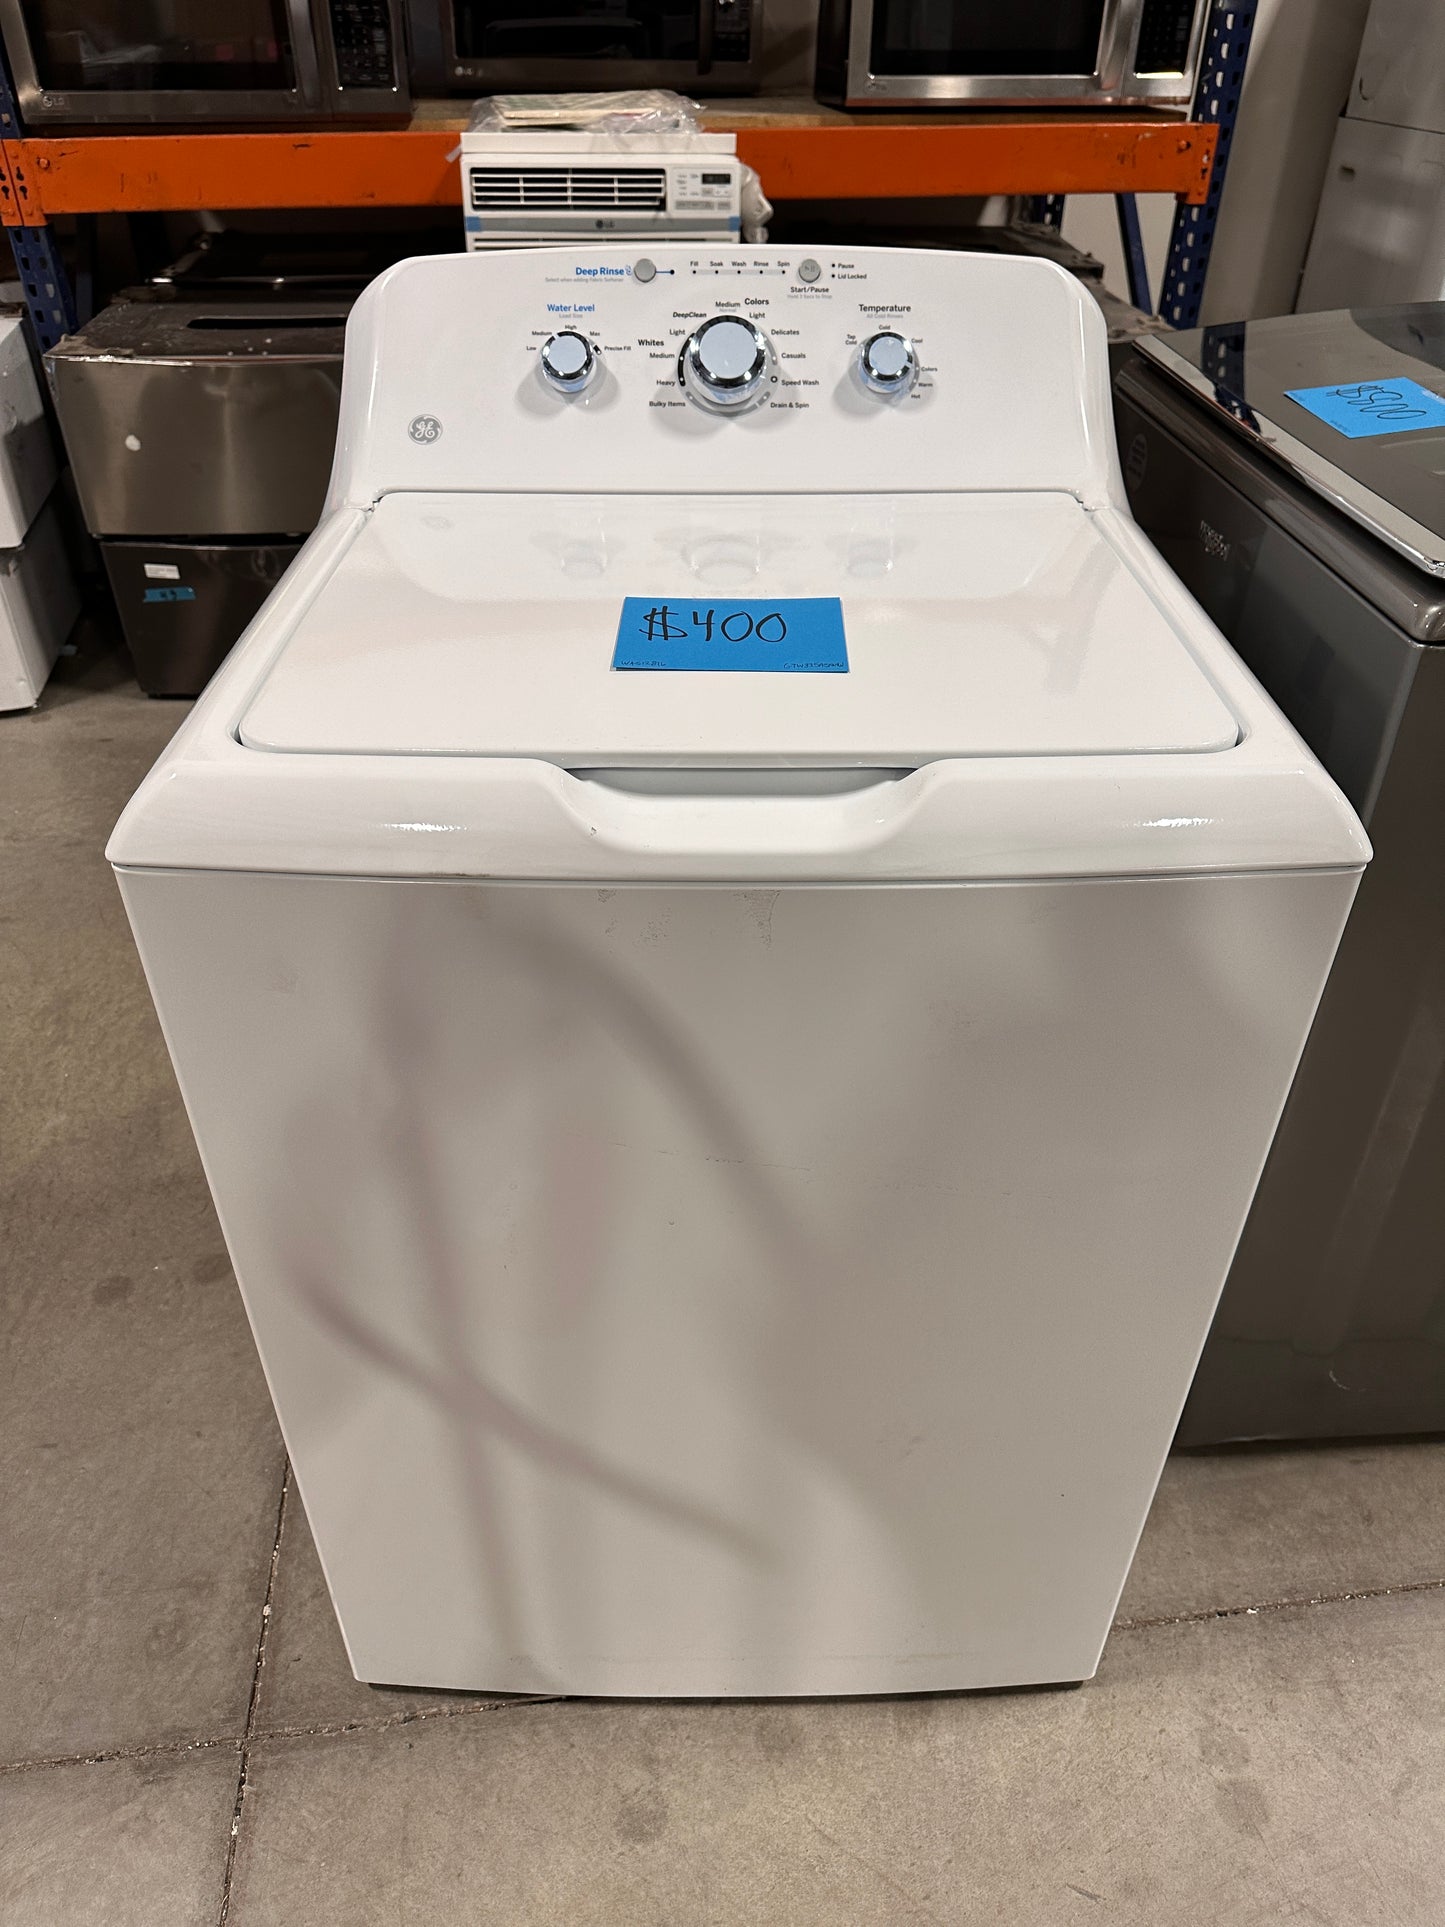 NEW GE TOP LOAD WASHER WITH DEEP RINSE - WAS12816